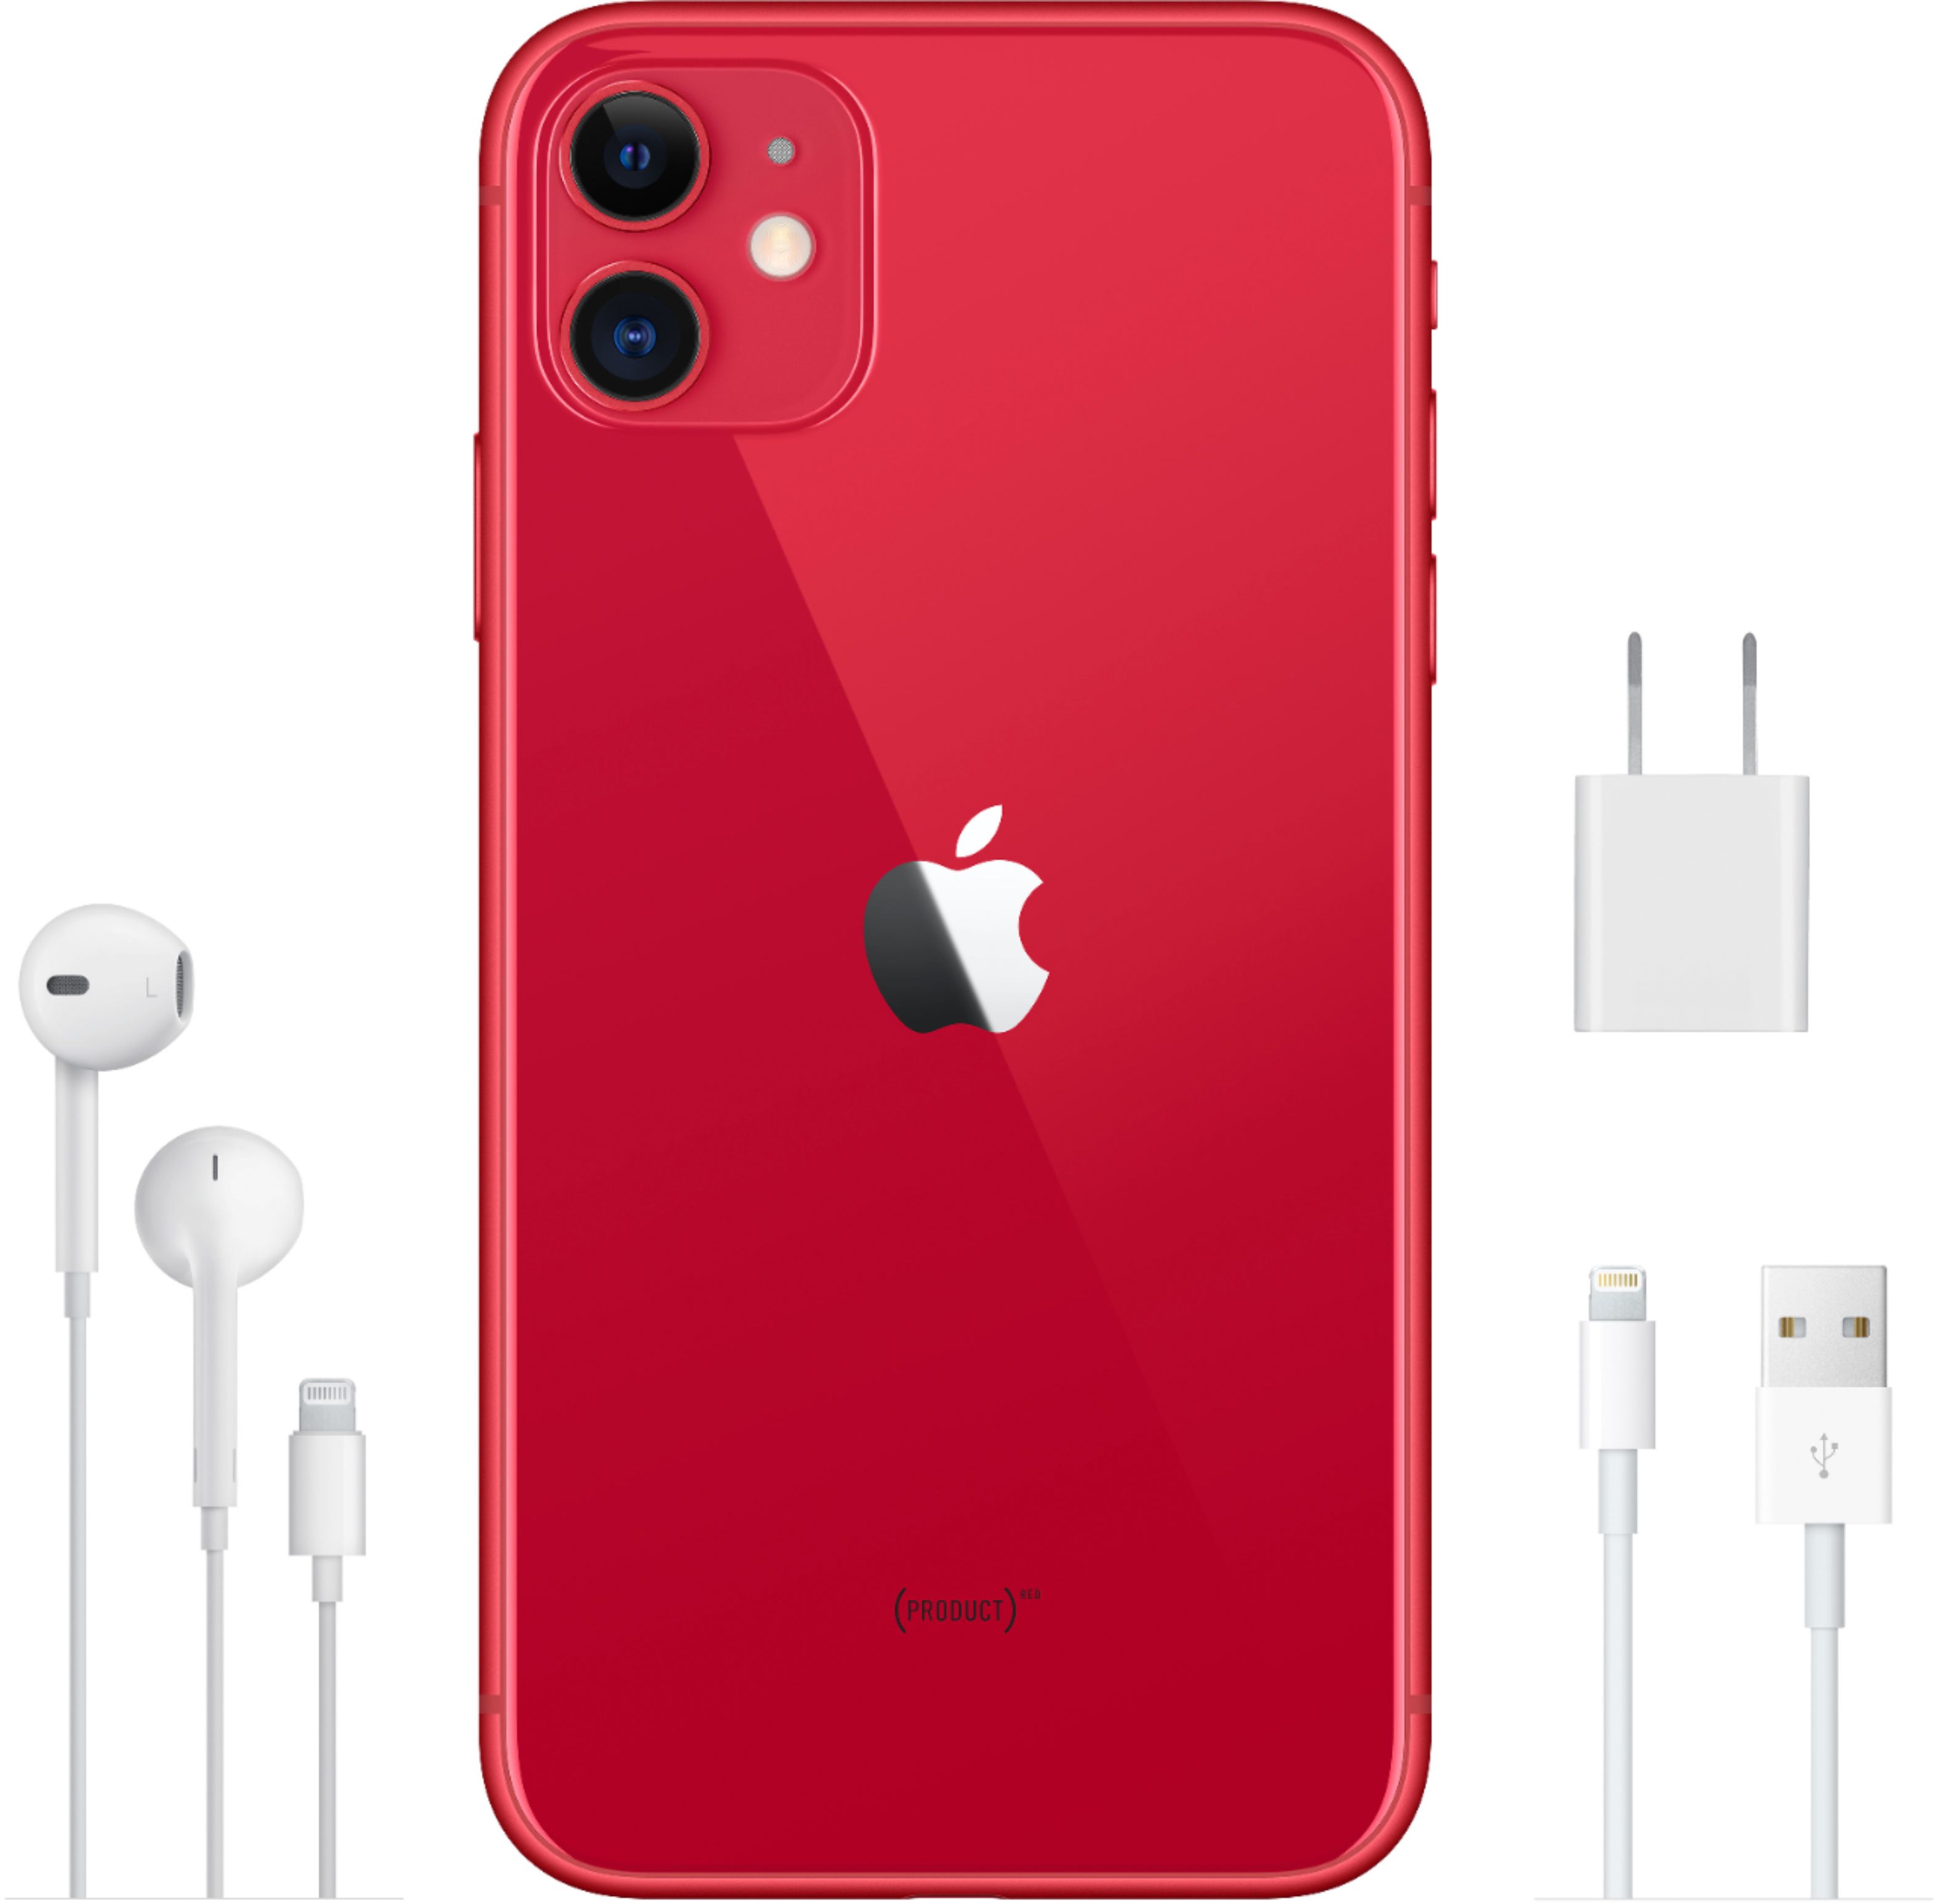 Best Buy: Apple iPhone 11 128GB (PRODUCT)RED (Sprint) MWLG2LL/A